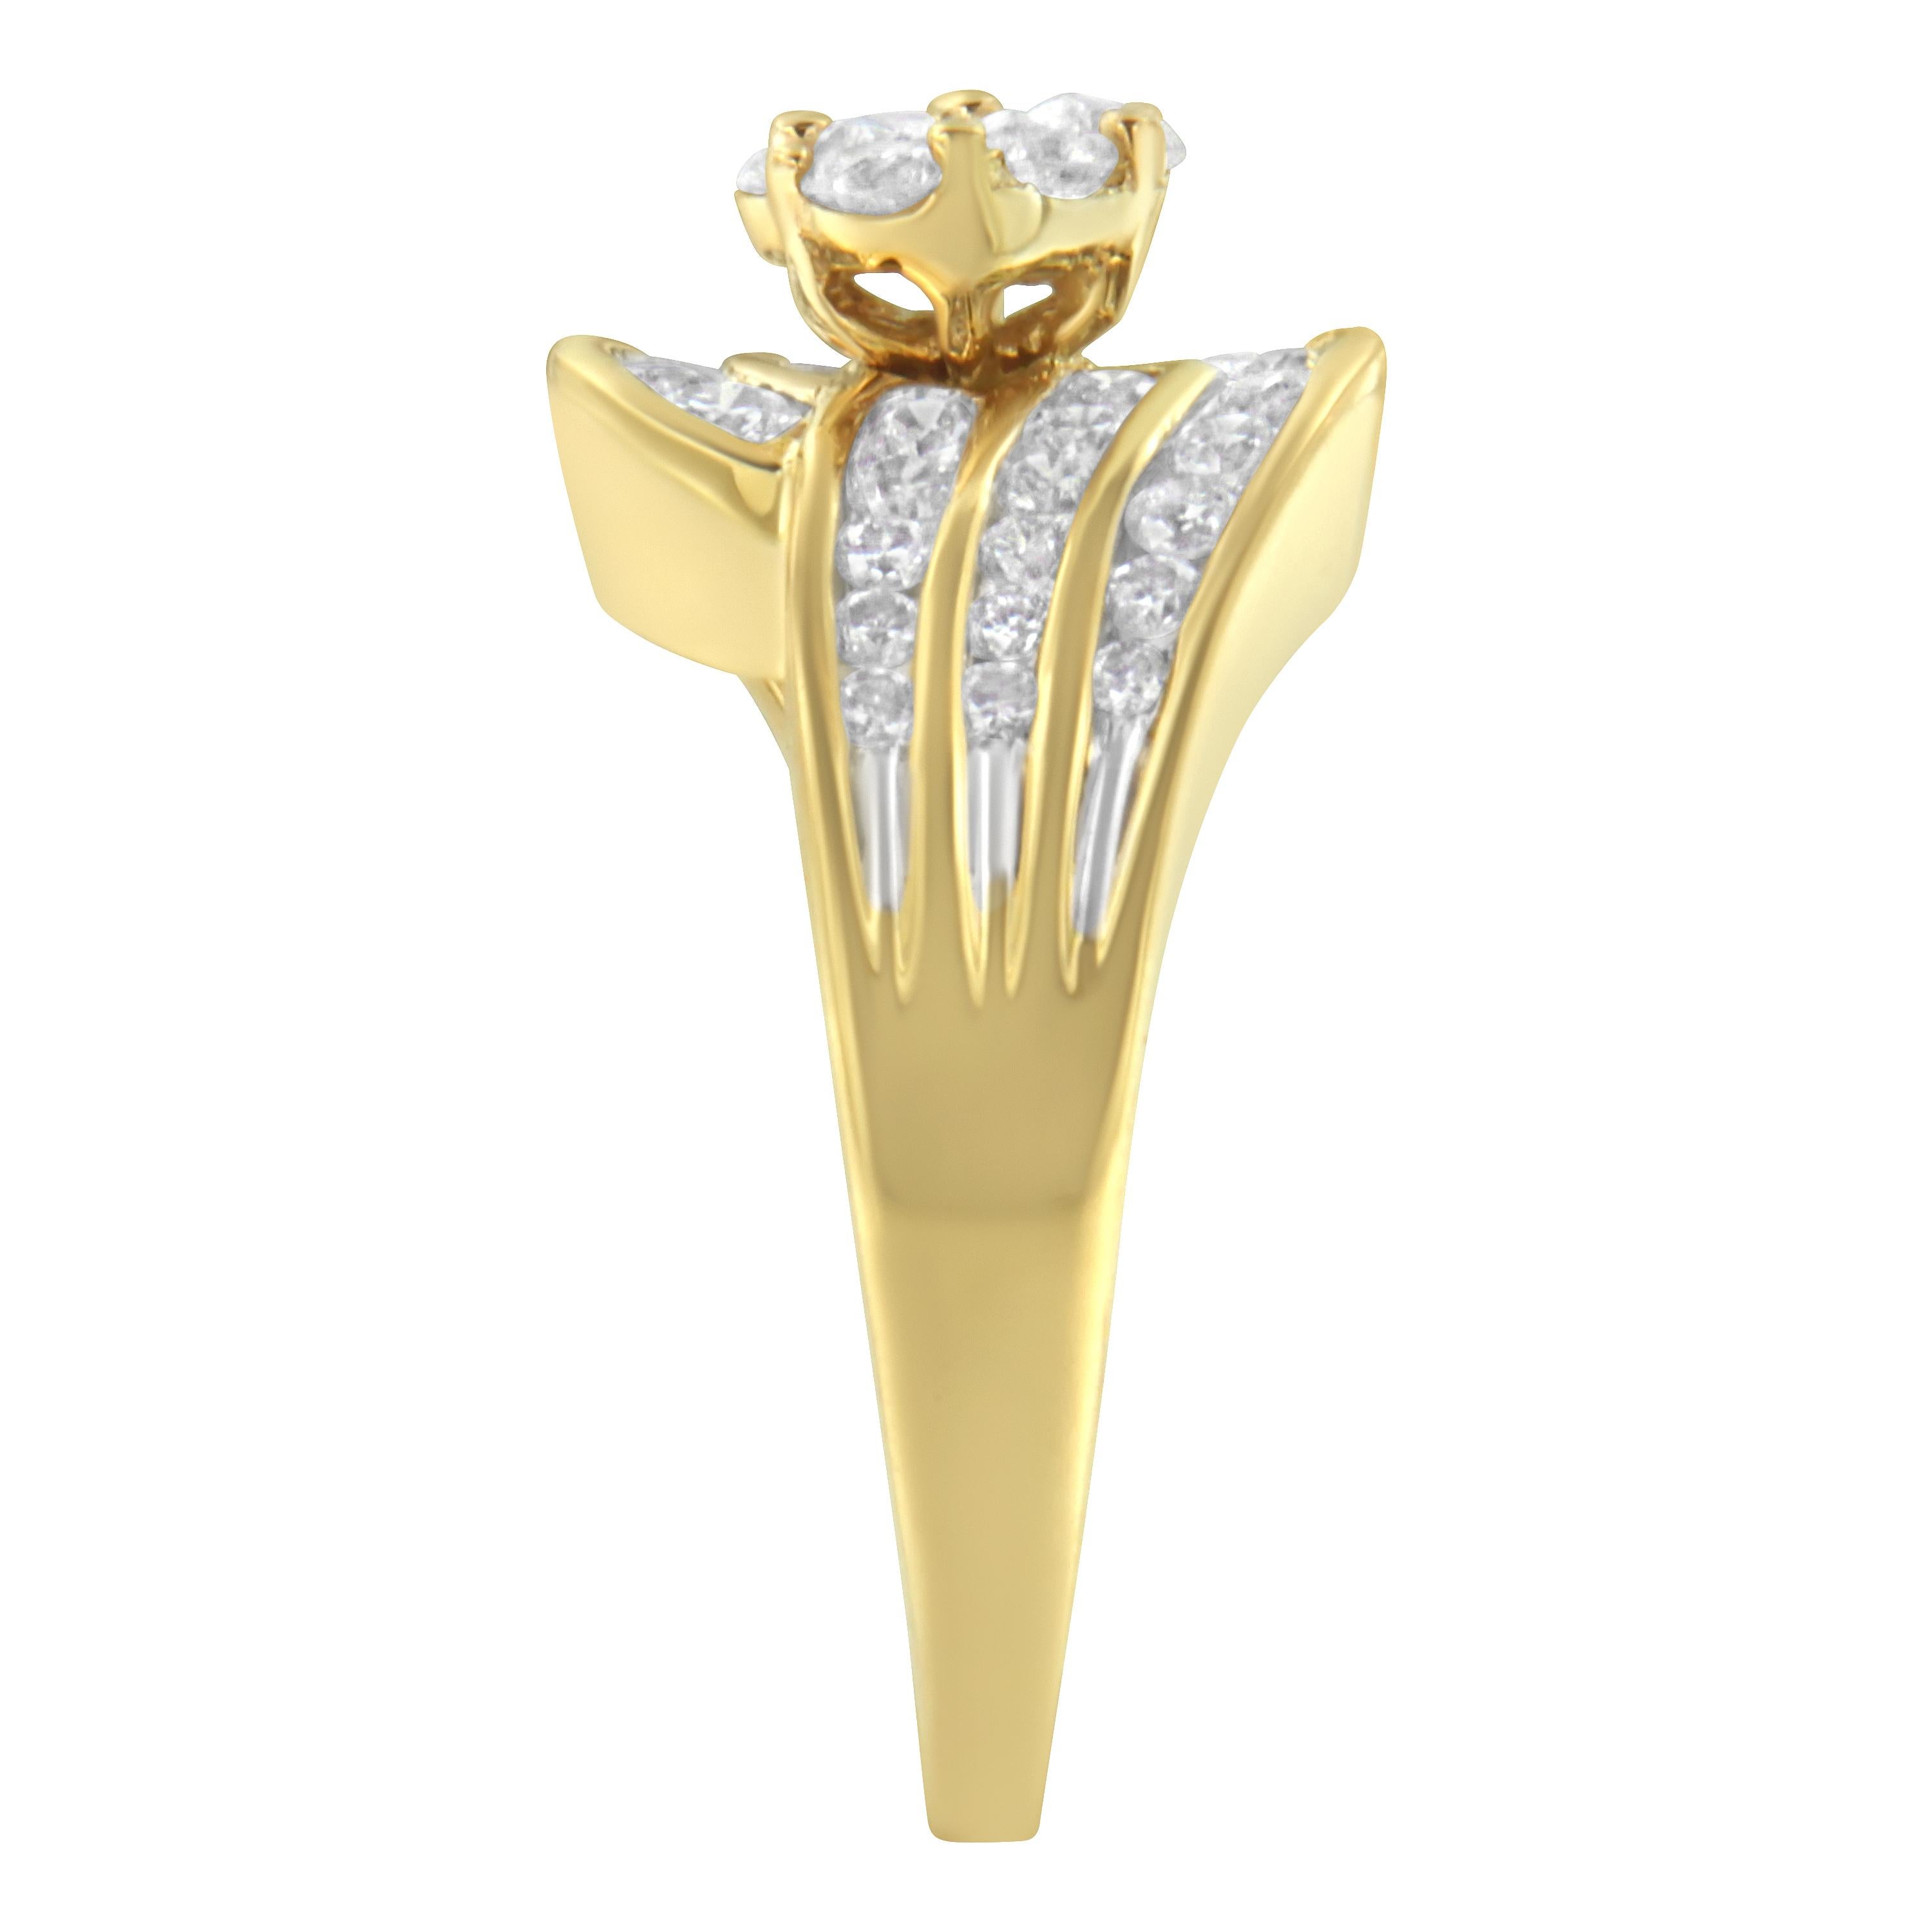 For Sale:  14K Yellow Gold 1 1/2 Carat Diamond Cocktail Bypass Ring 6